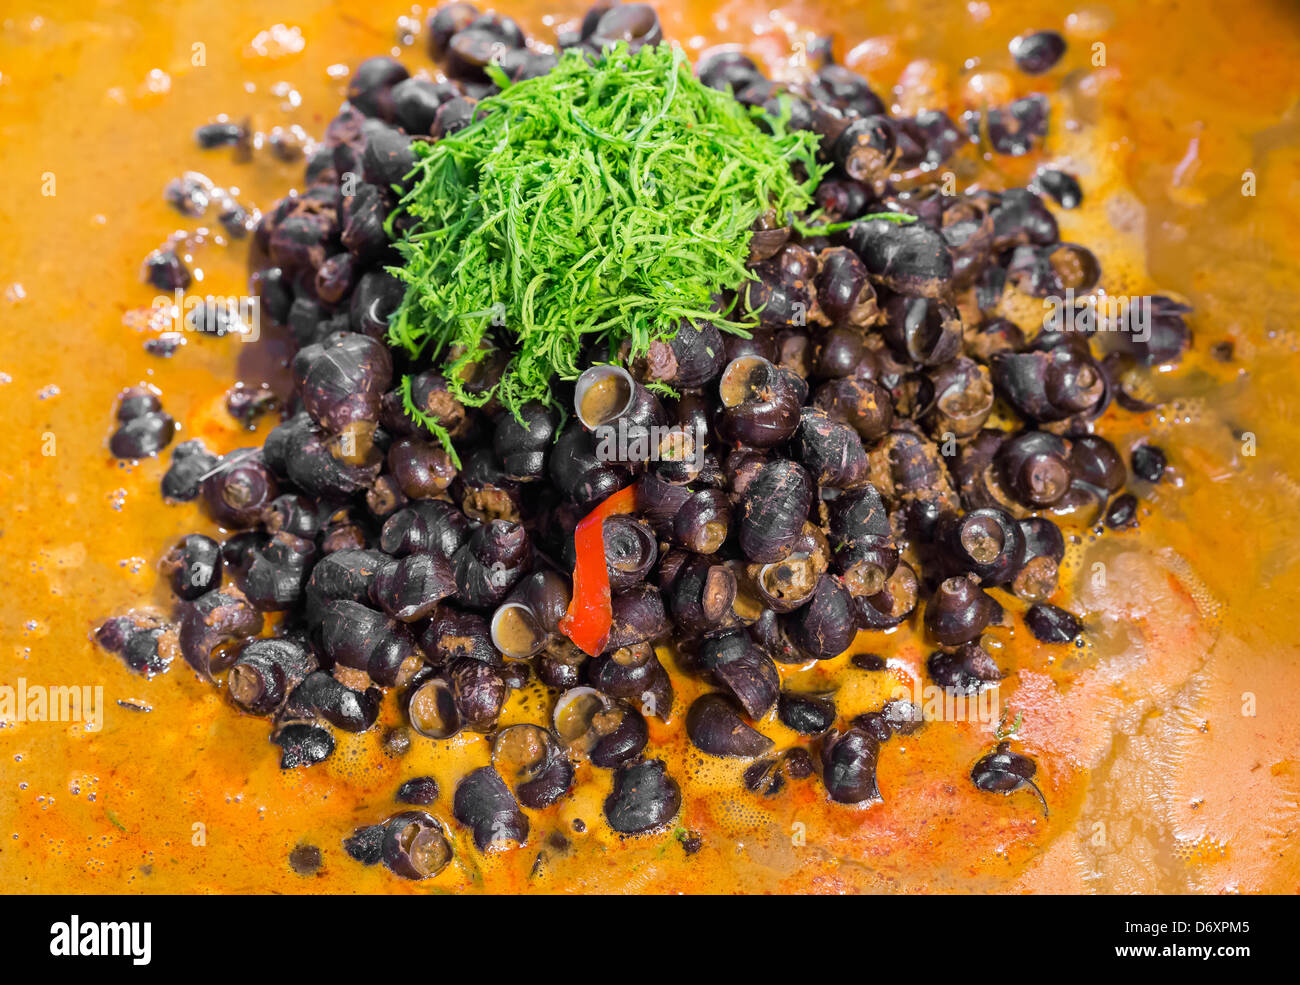 Pond snail, Marsh snail, River snail red curry with Acacia pennata Stock Photo